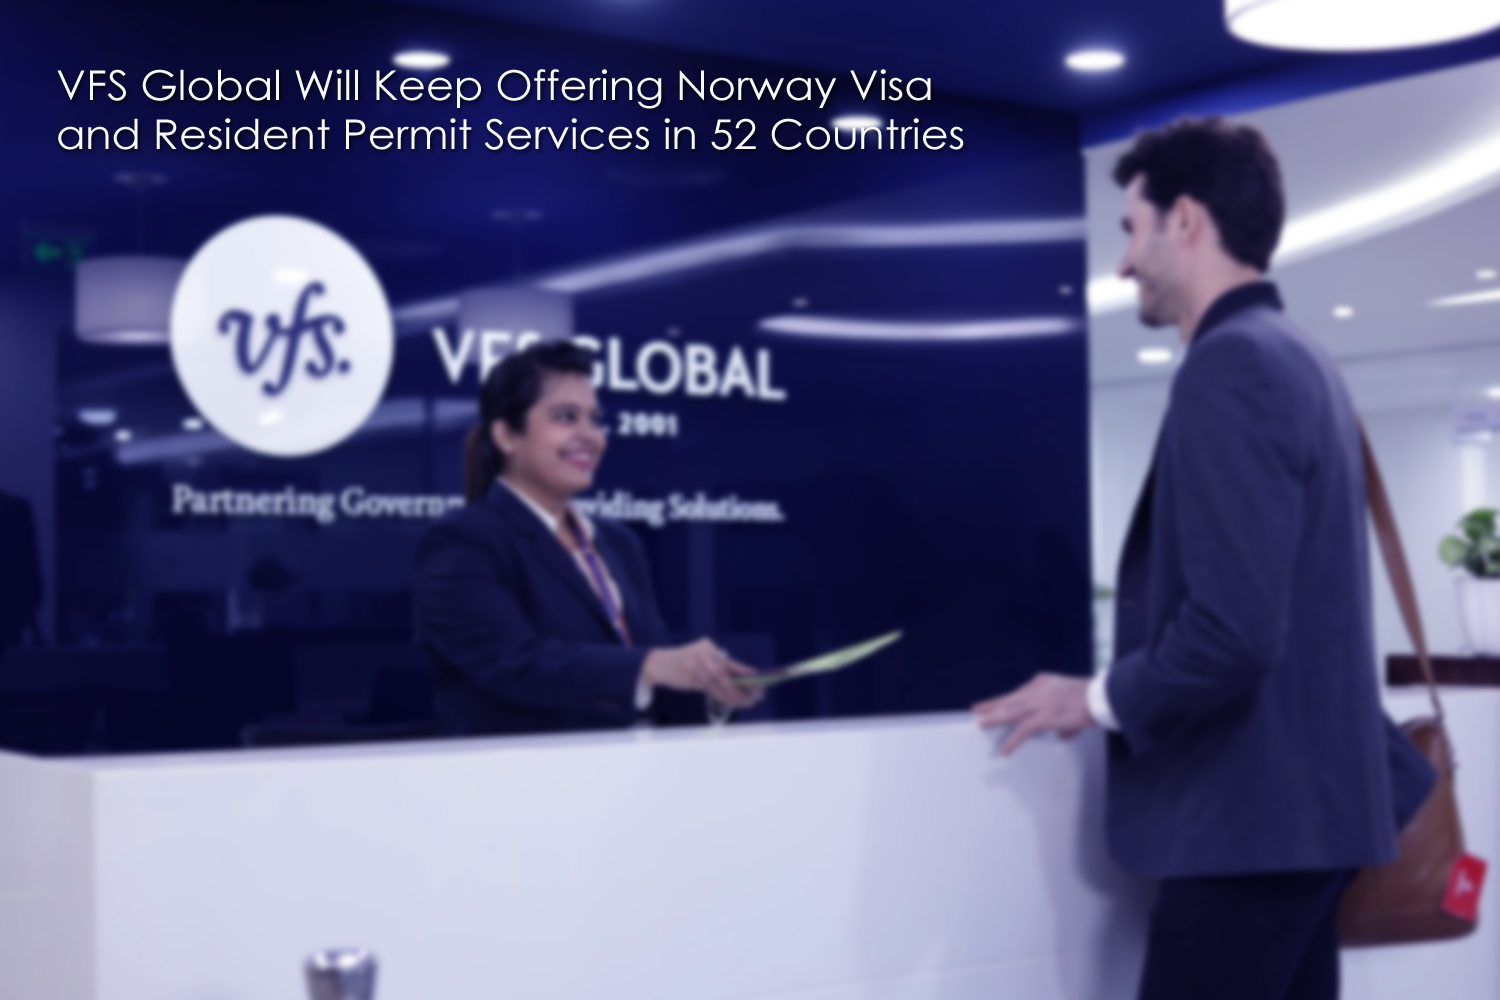 VFS Global Will Keep Offering Norway Visa and Resident Permit Services in 52 Countries.